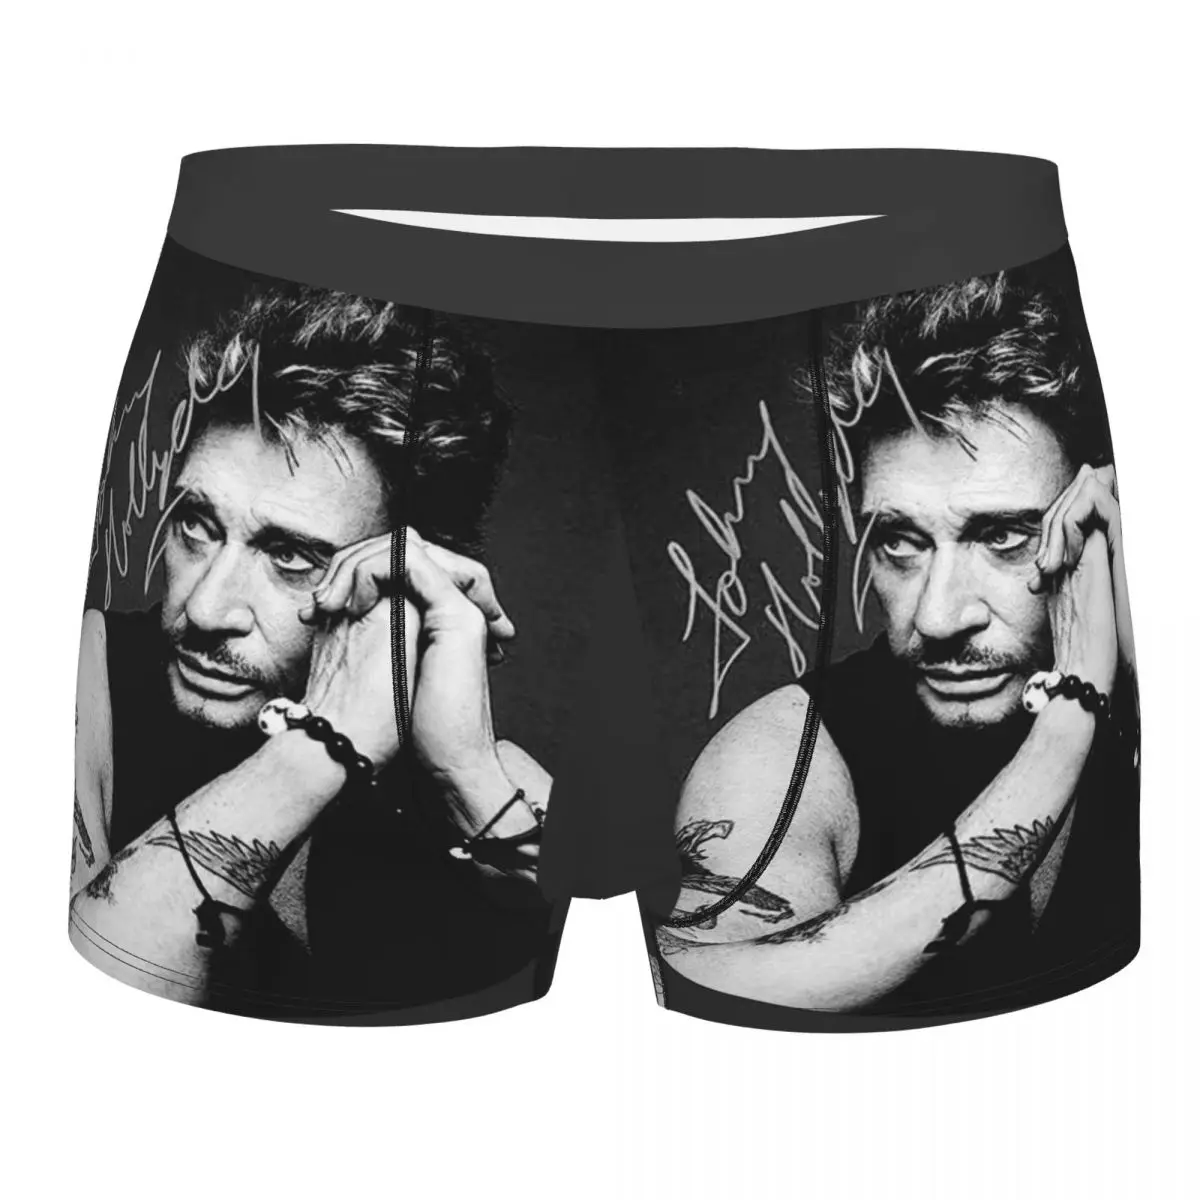 France Rock Singer CrewJohnny Hallyday Men Boxer Briefs Underpants Highly Breathable High Quality Gift Idea